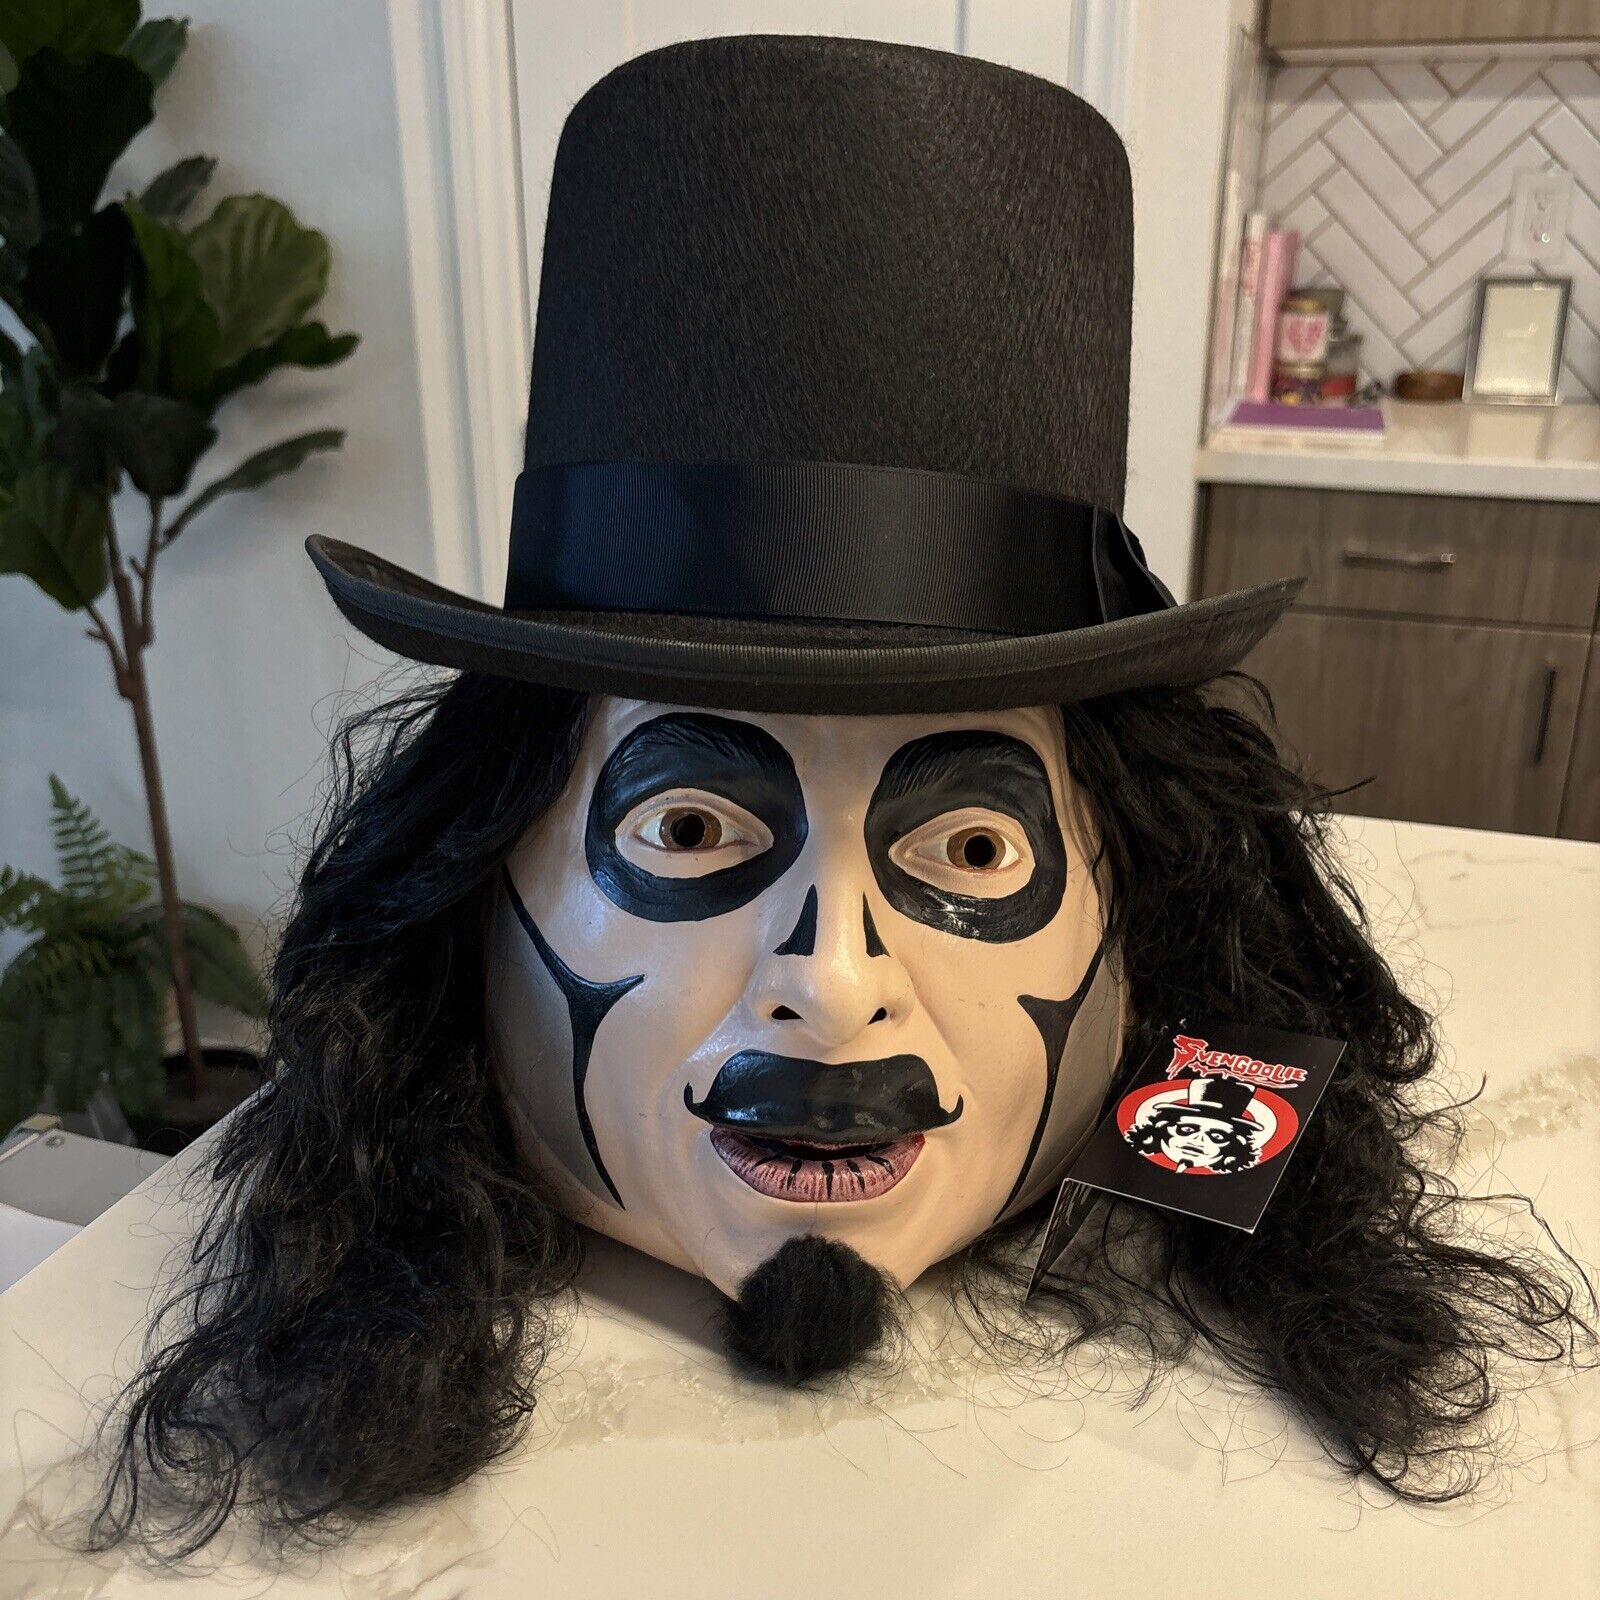 Brand New Svengoolie Halloween Mask With Hat And Wig. Trick Or Treat Studios ✅